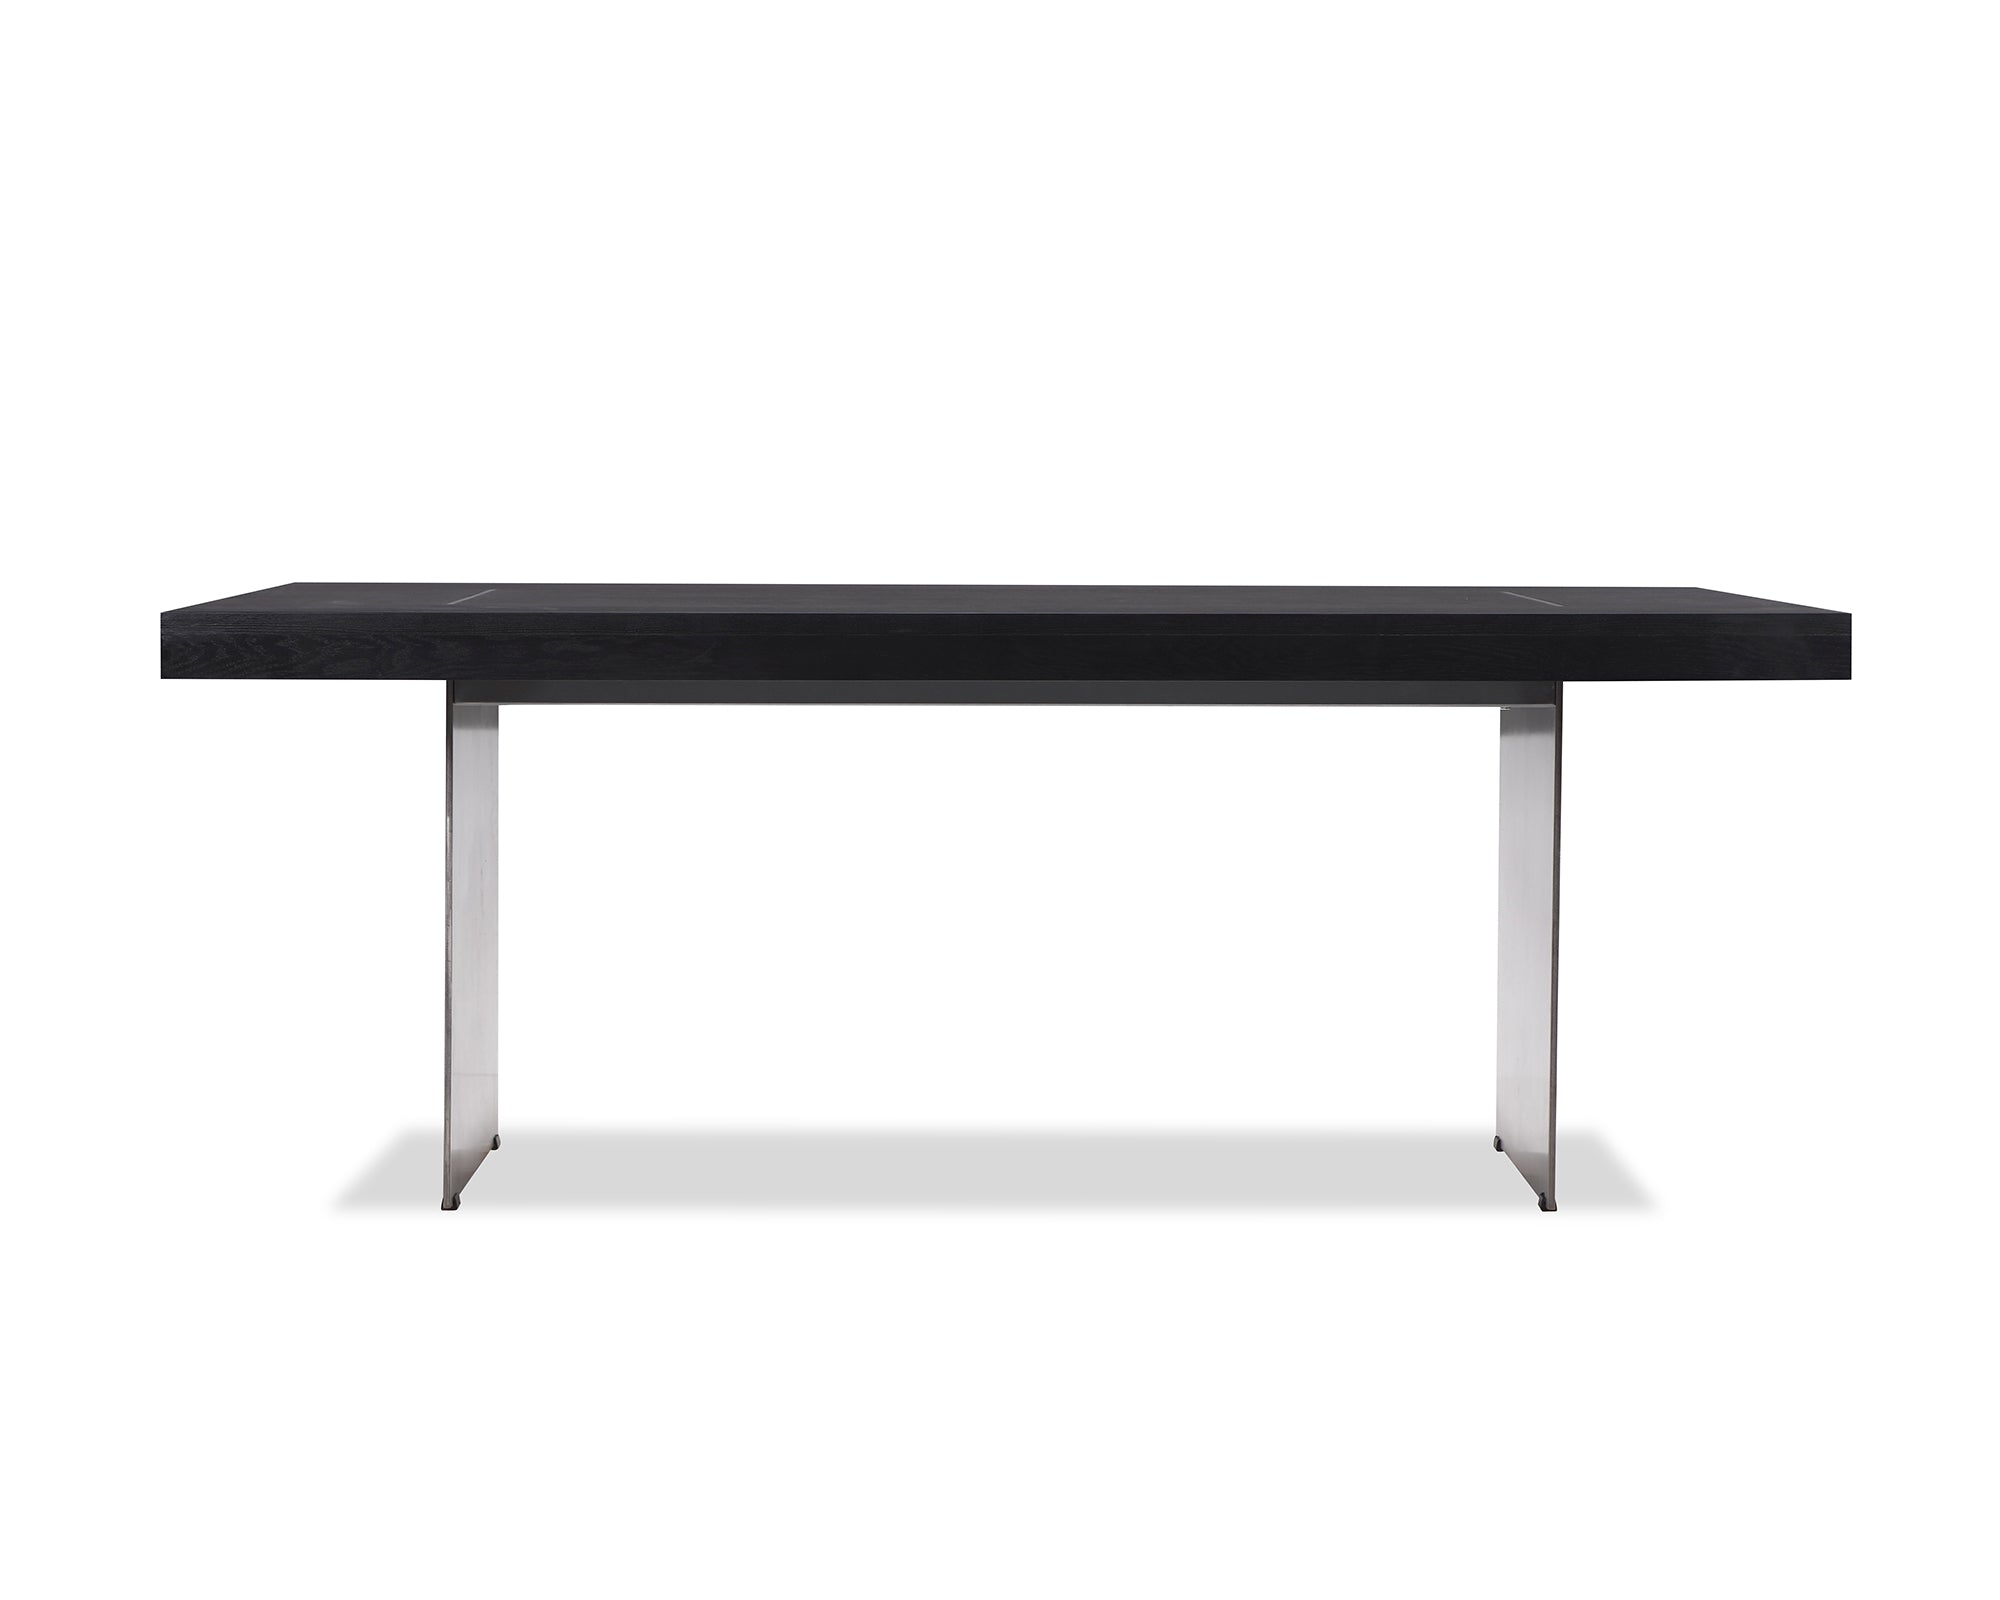 Liang Eimil Unma Dining Table Black Ash Brushed Stainless Steel Legs